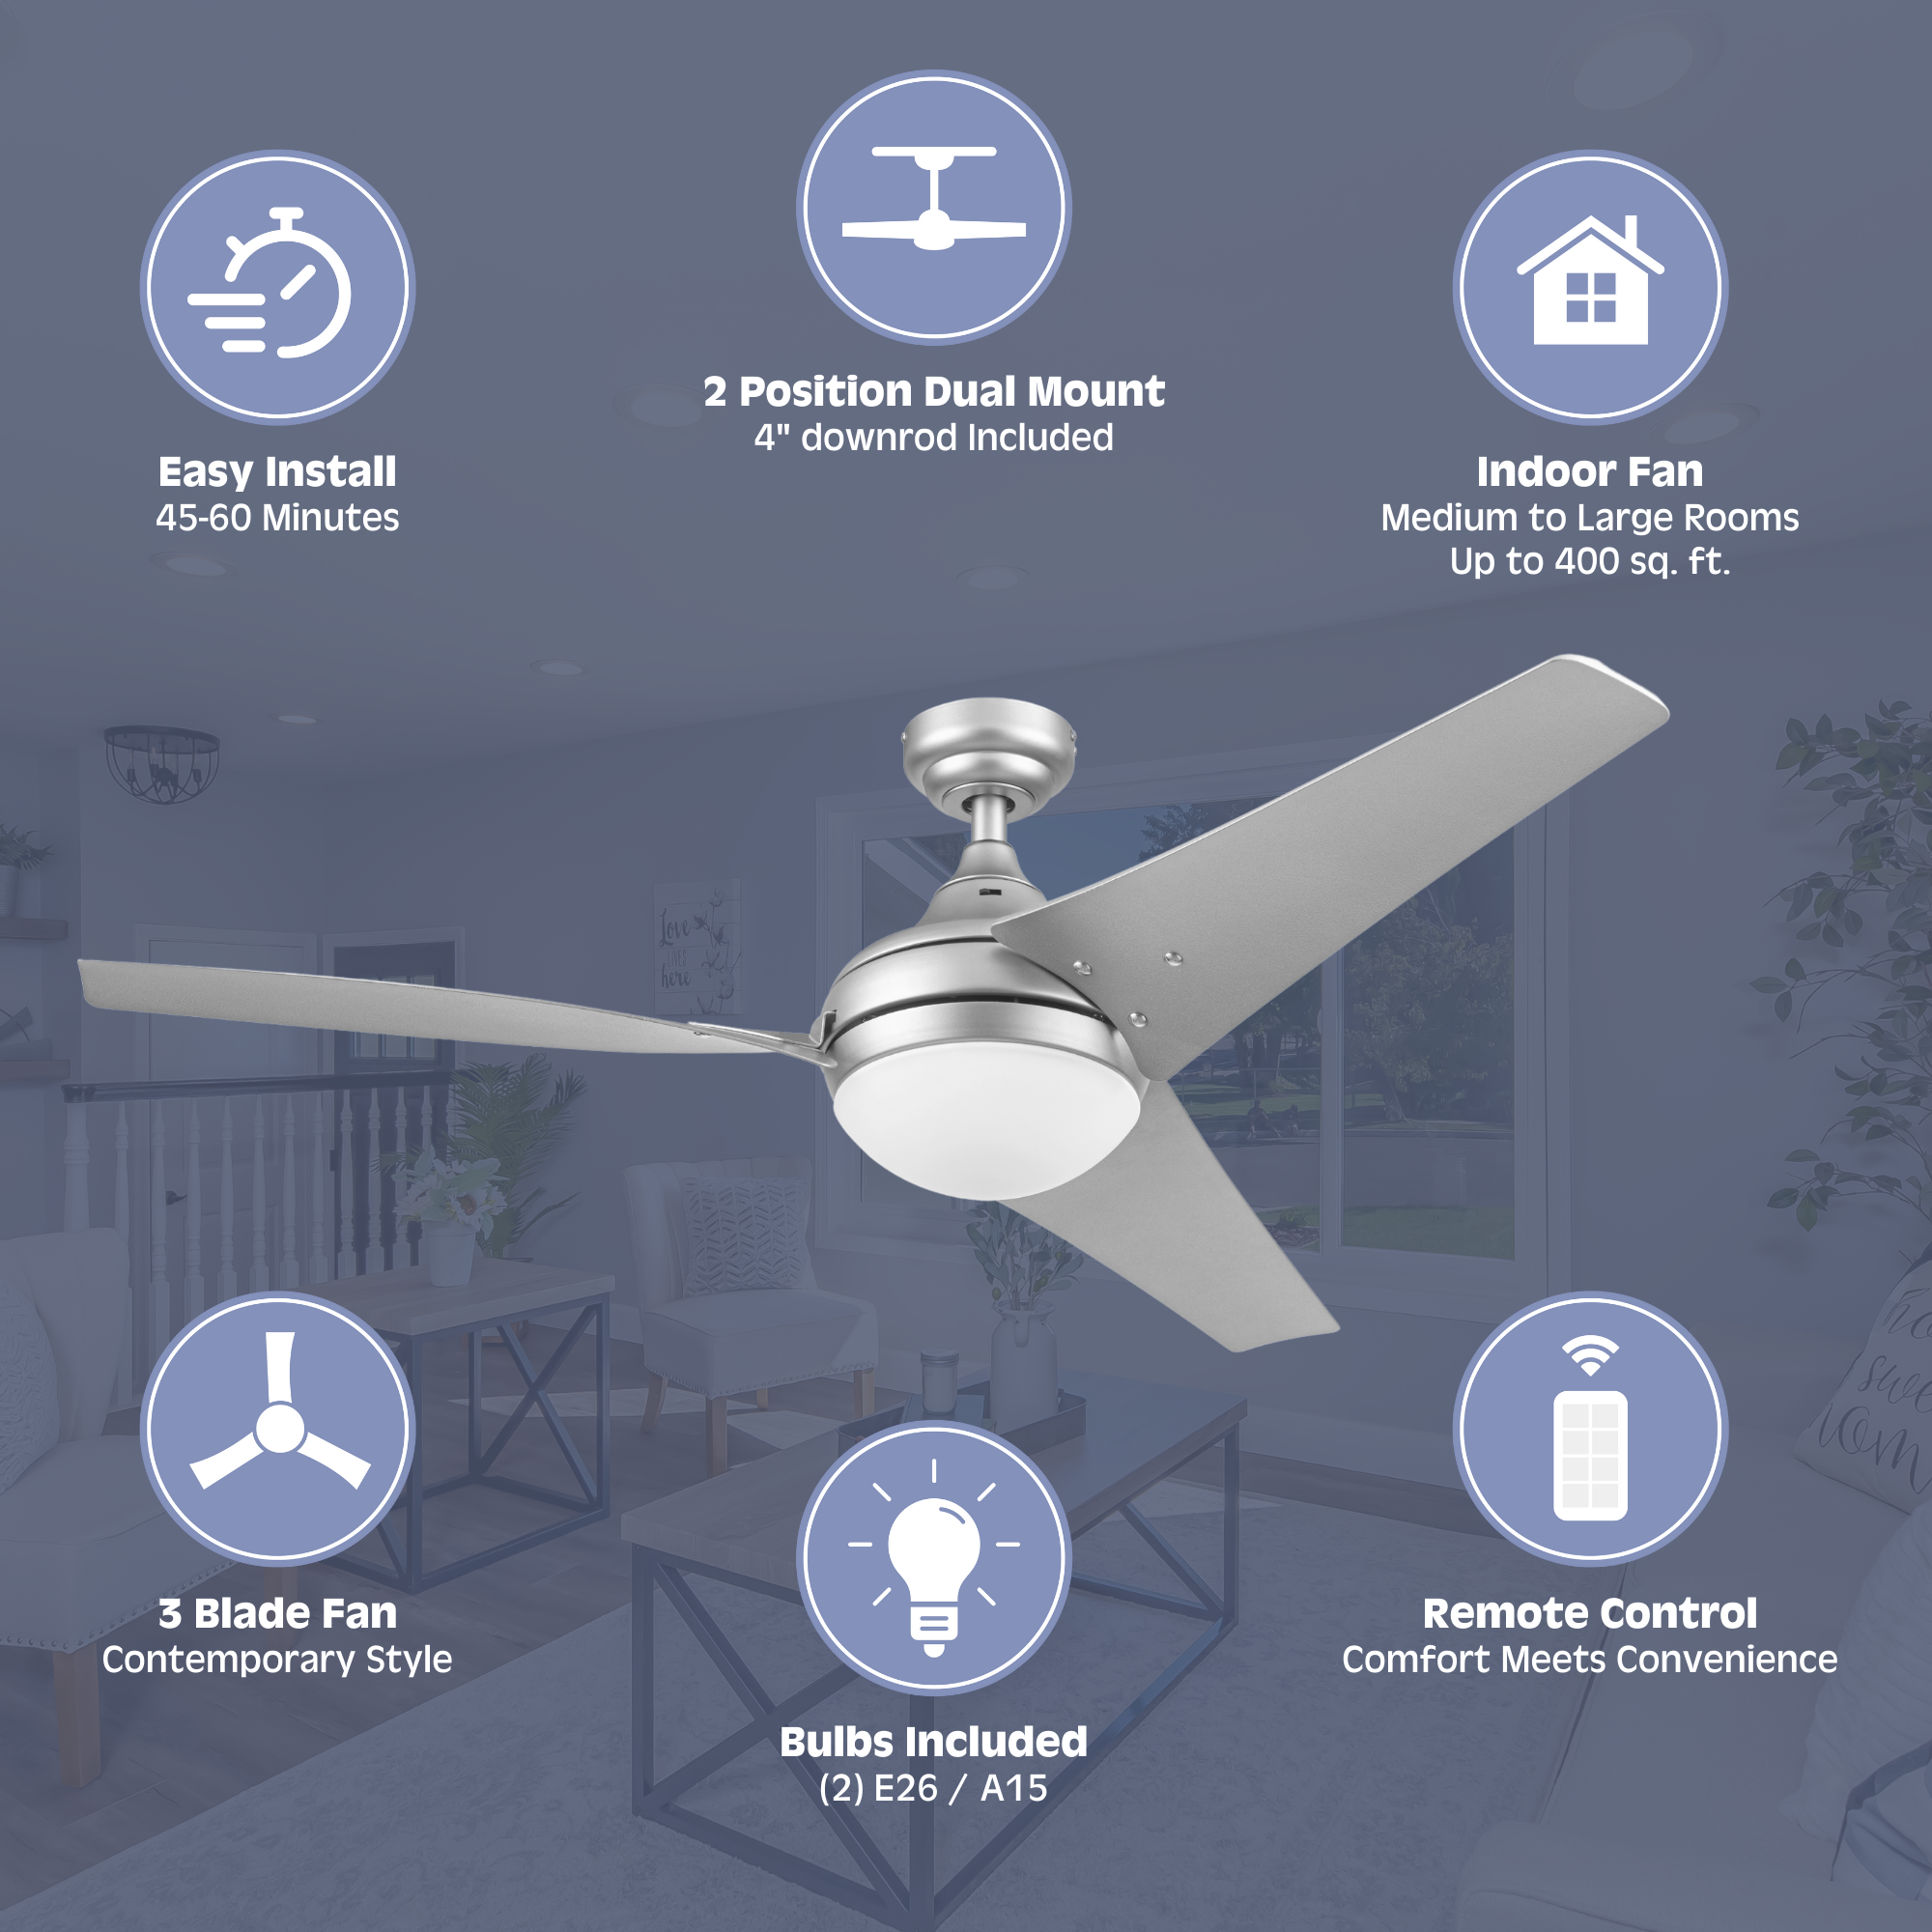 52 Inch Maxon, Matte Nickel, Remote Control, Ceiling Fan by Prominence Home